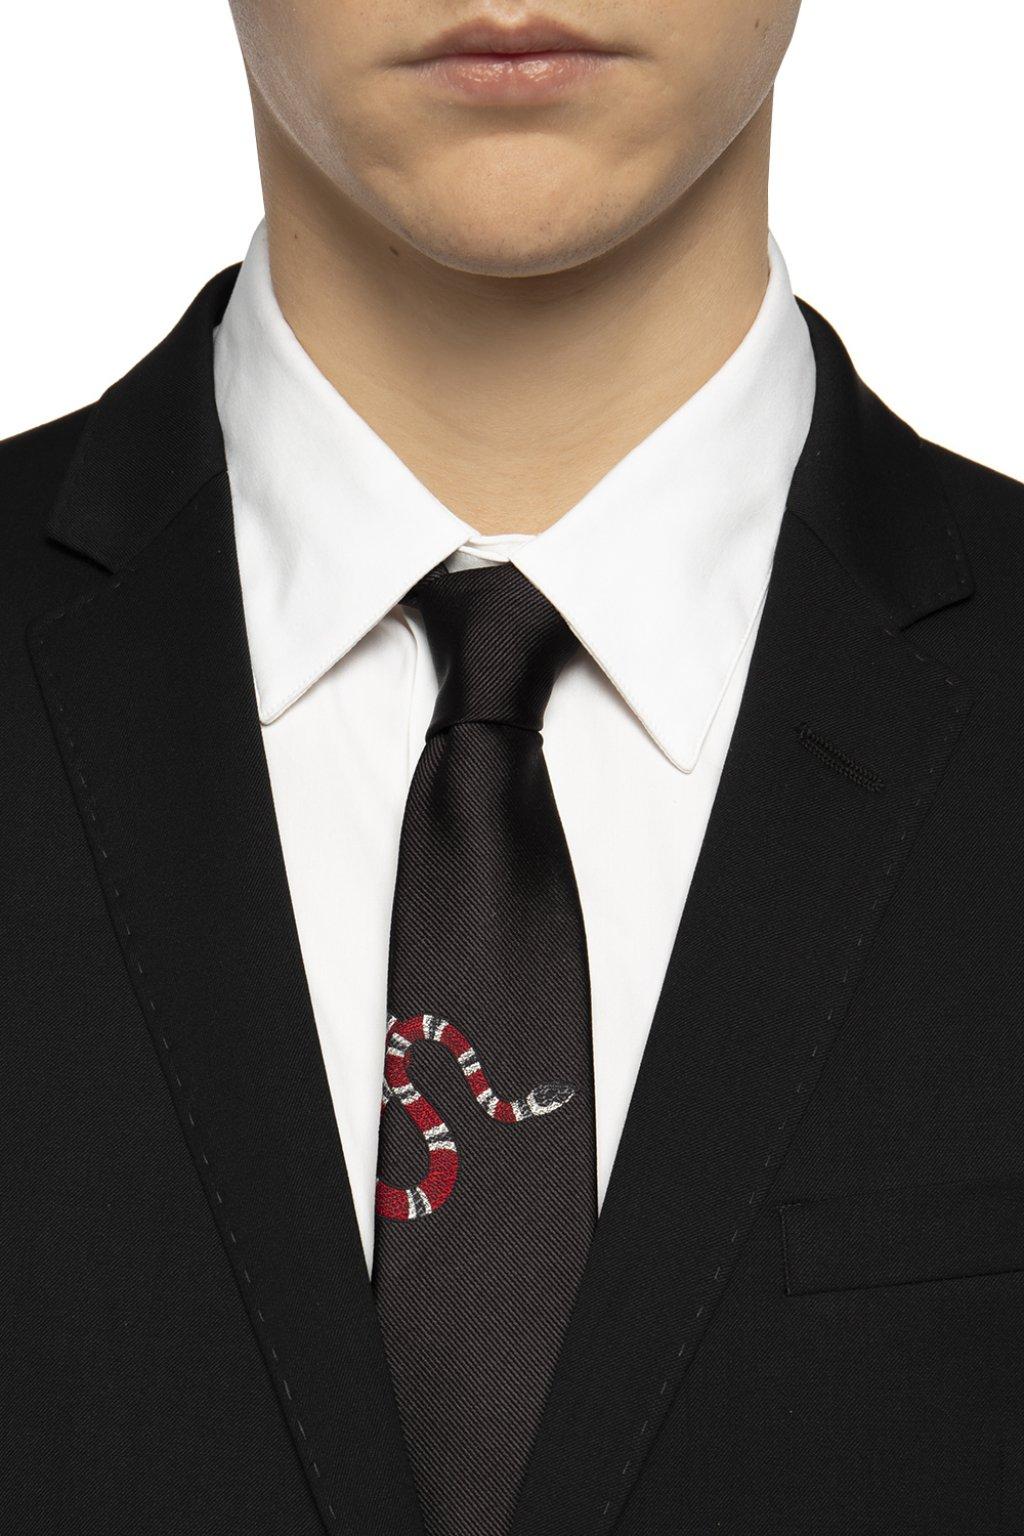 gucci snake tie